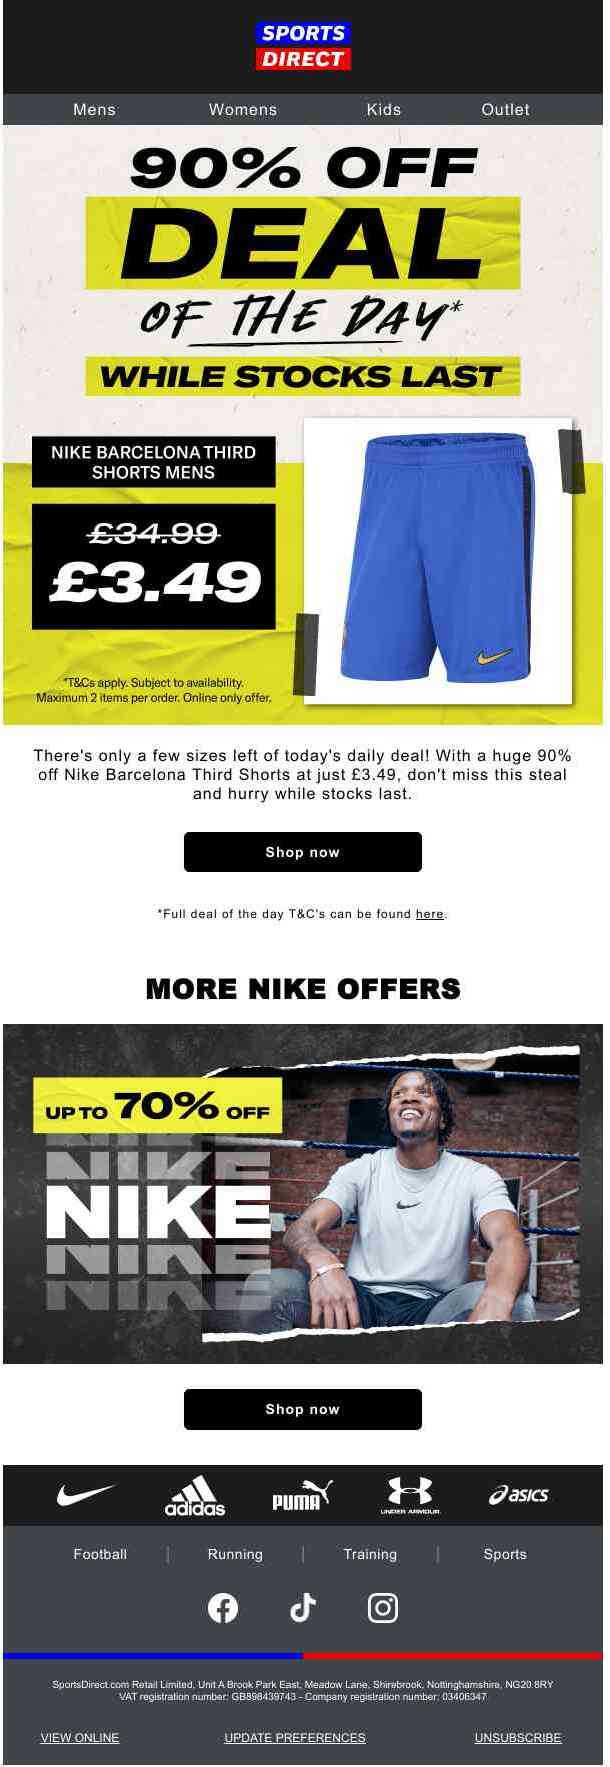 GOING FAST! ⏰ £3.49 Nike Shorts